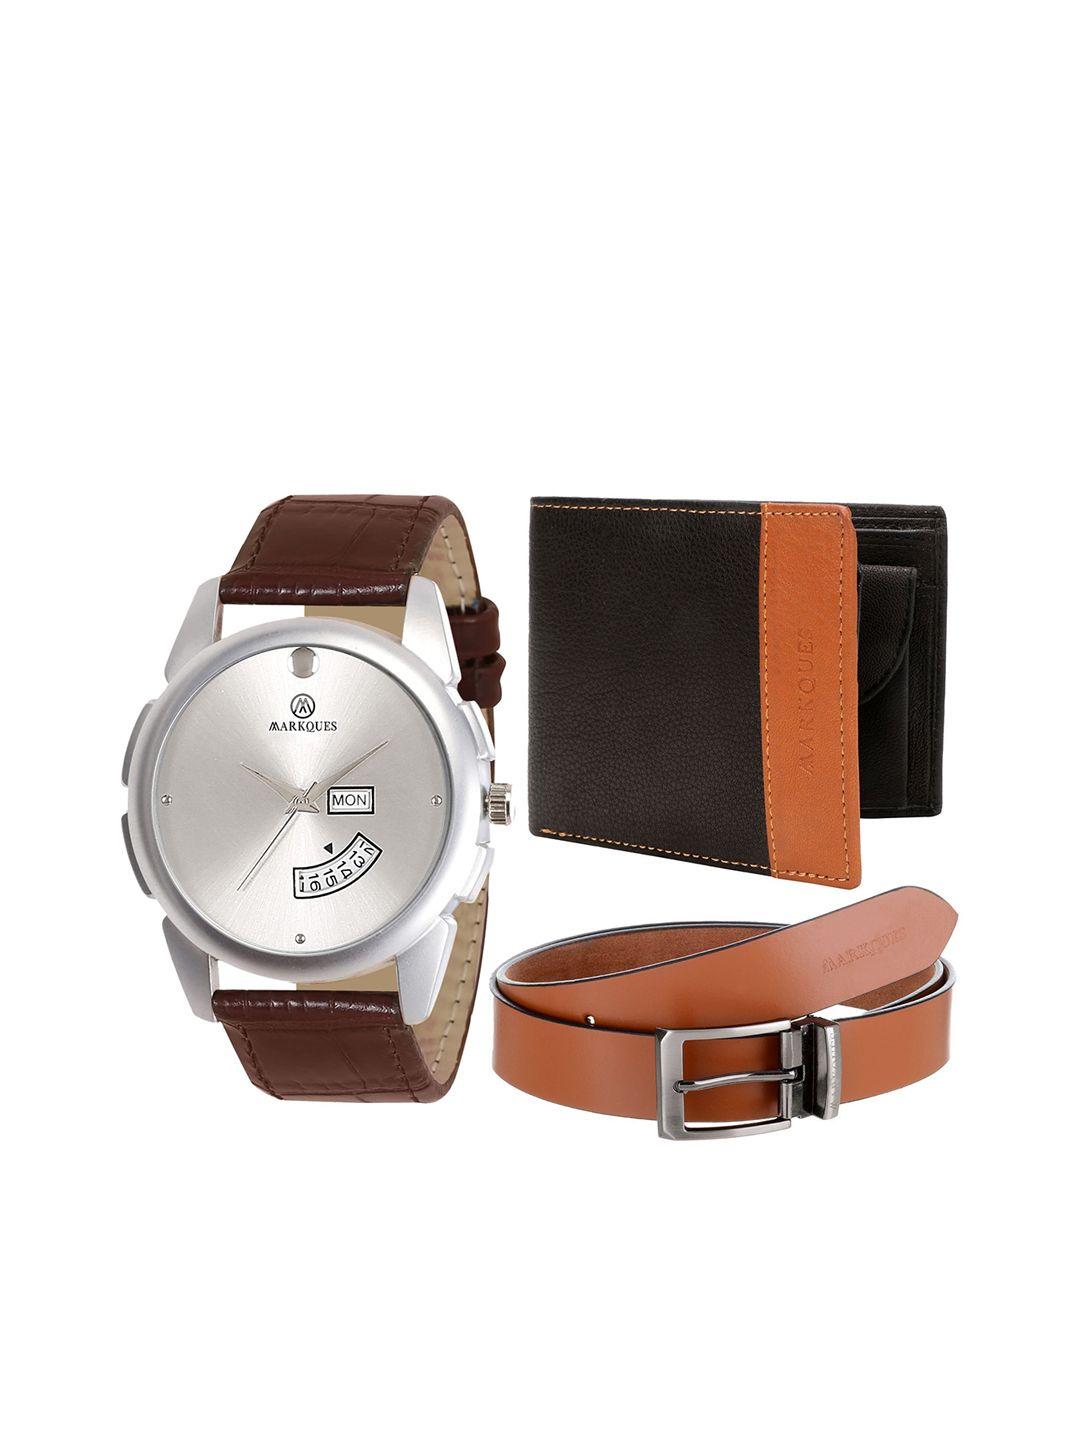 markques-men-brown-solid-leather-accessory-gift-set